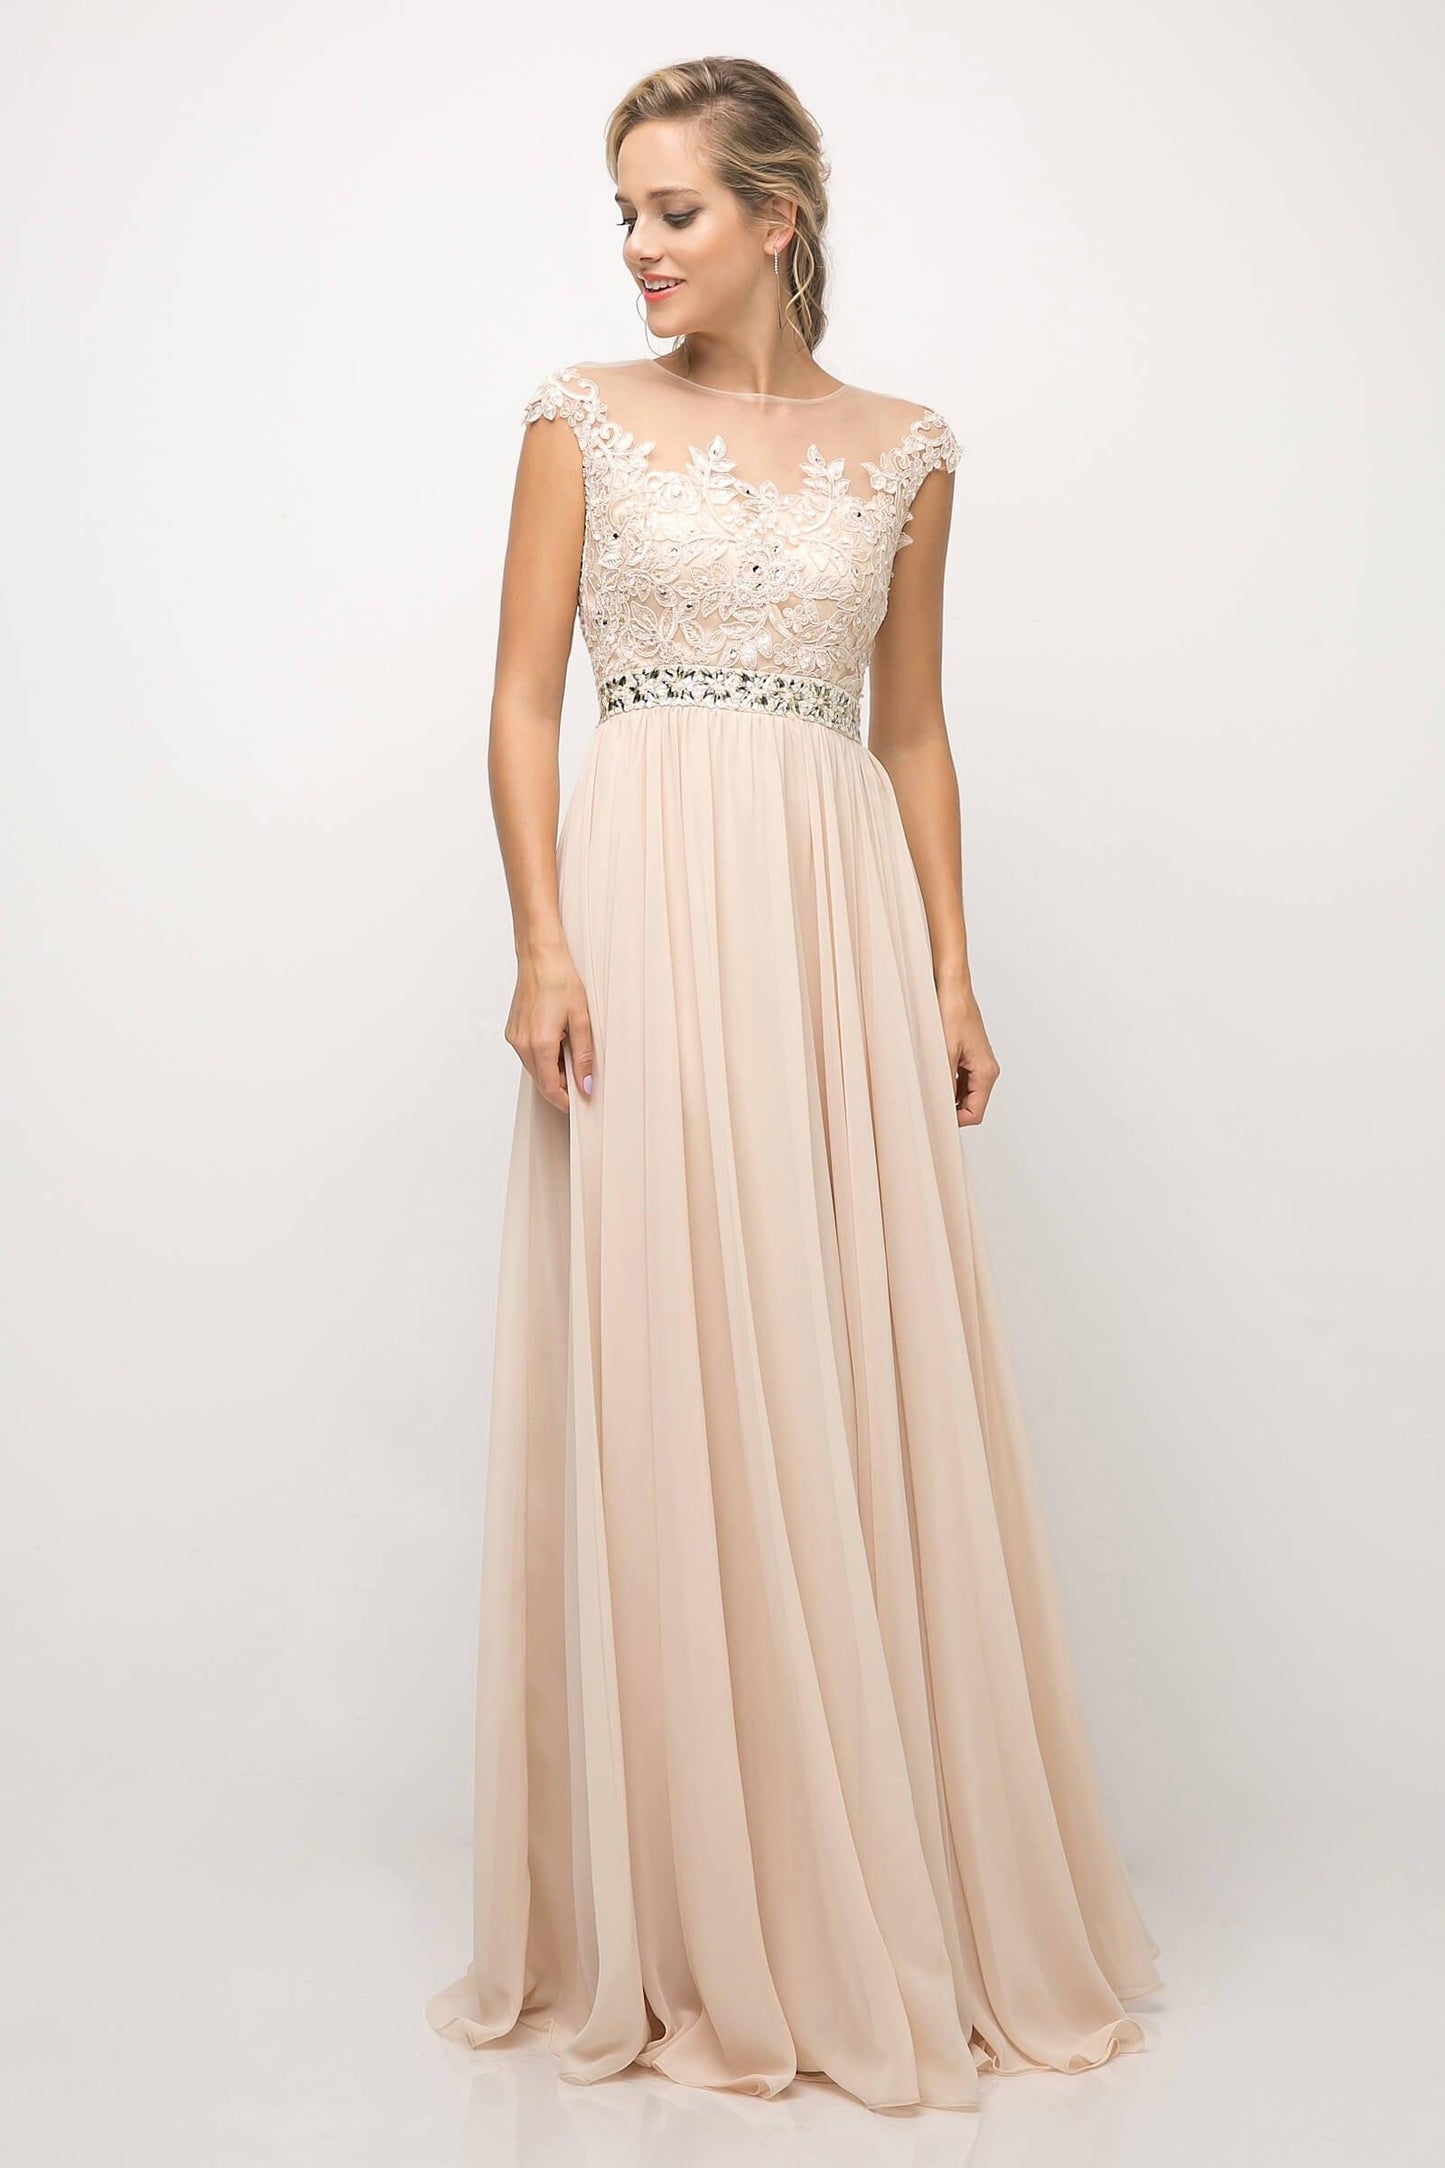 Cap Sleeve Formal Dress Chiffon Prom Long Gown - The Dress Outlet Cinderella Divine